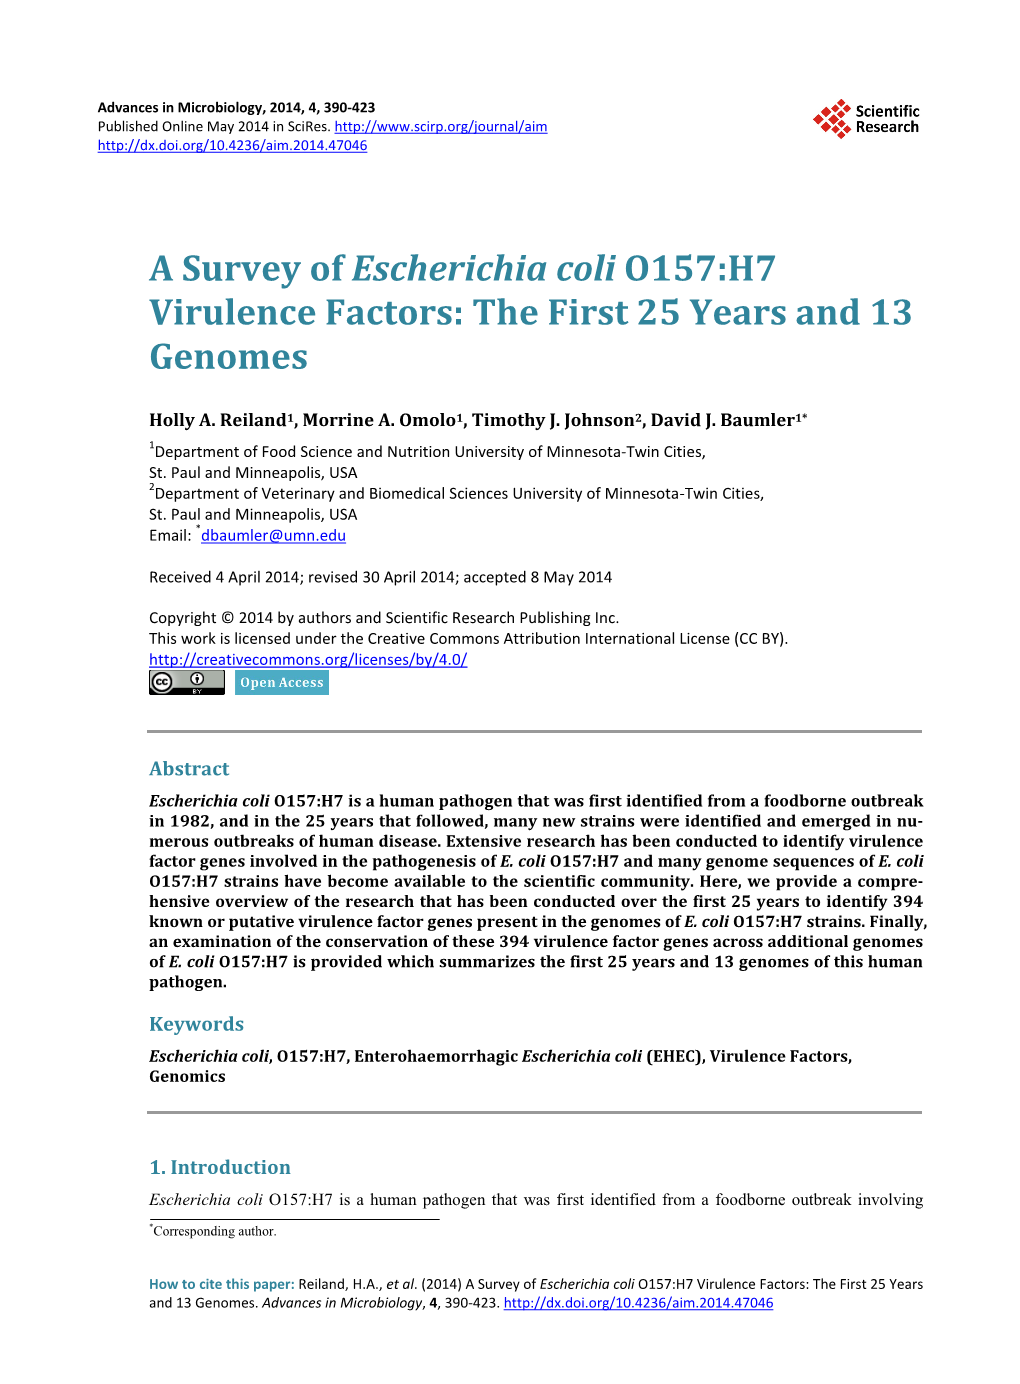 A Survey of Escherichia Coli O157:H7 Virulence Factors: the First 25 Years and 13 Genomes